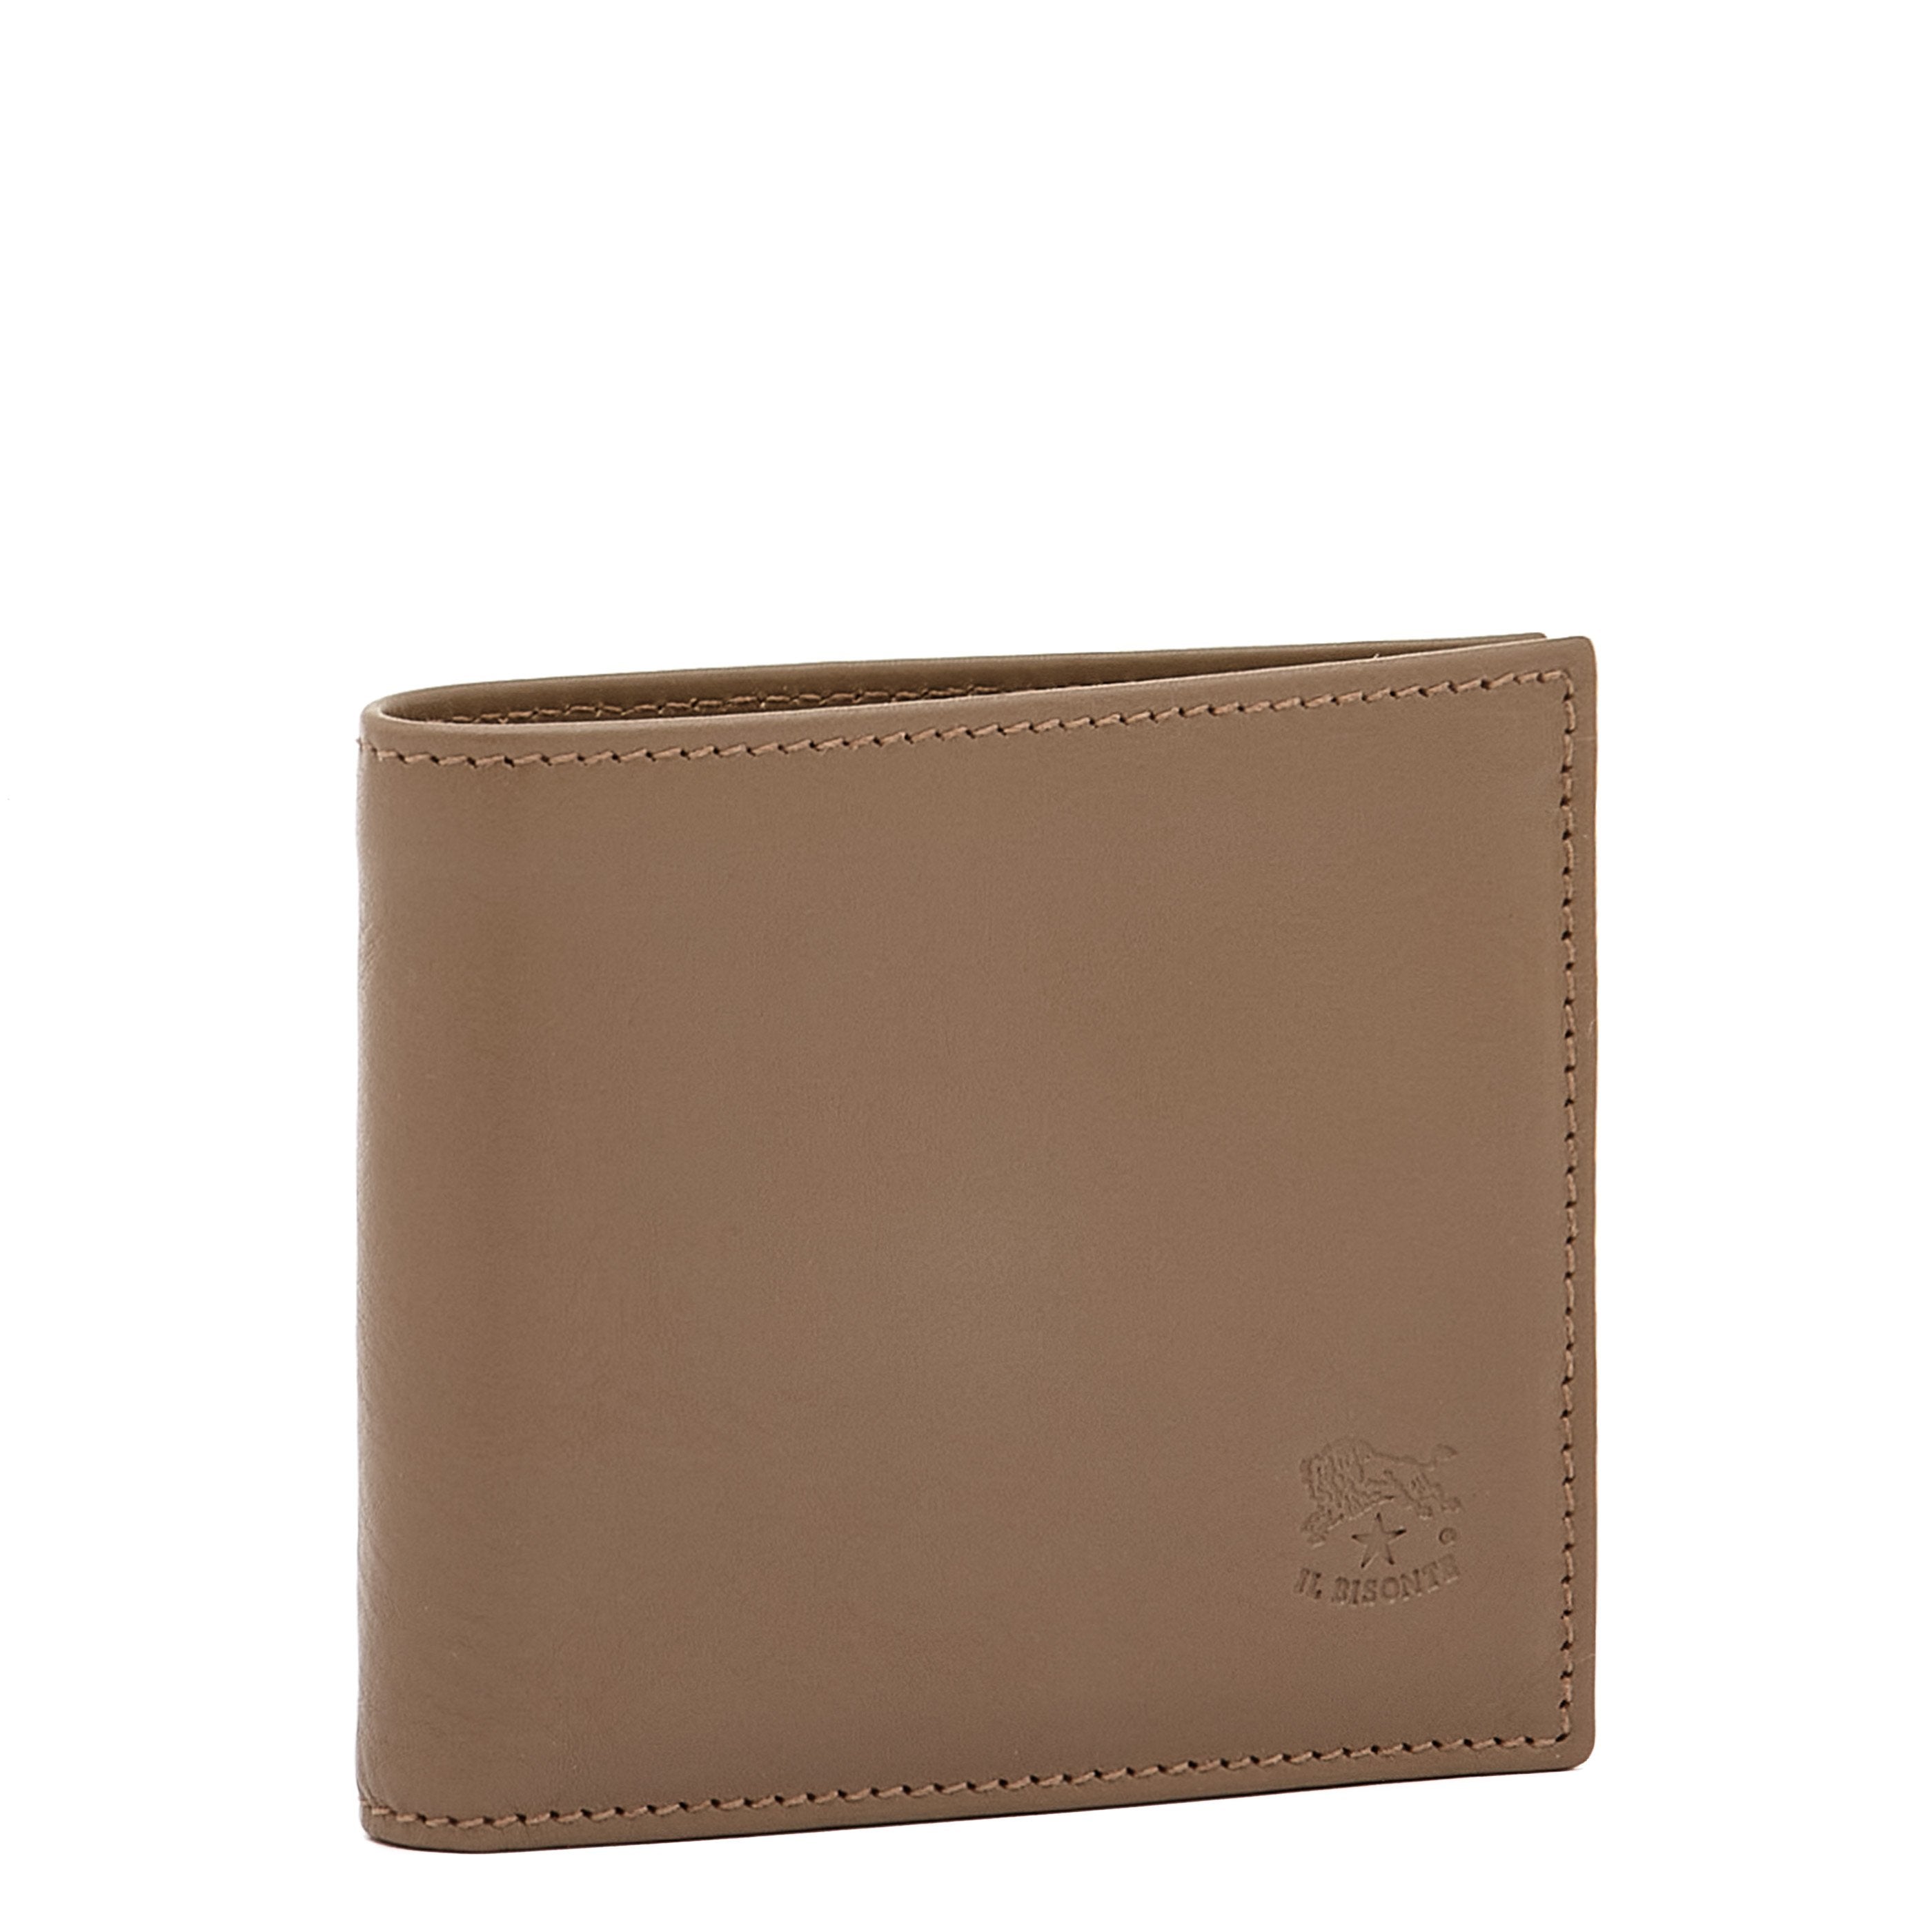 WOODLAND Woo-Inn-Br53 Tan Leather Wallet For Men'S in Bhopal at best price  by Leather Point - Justdial